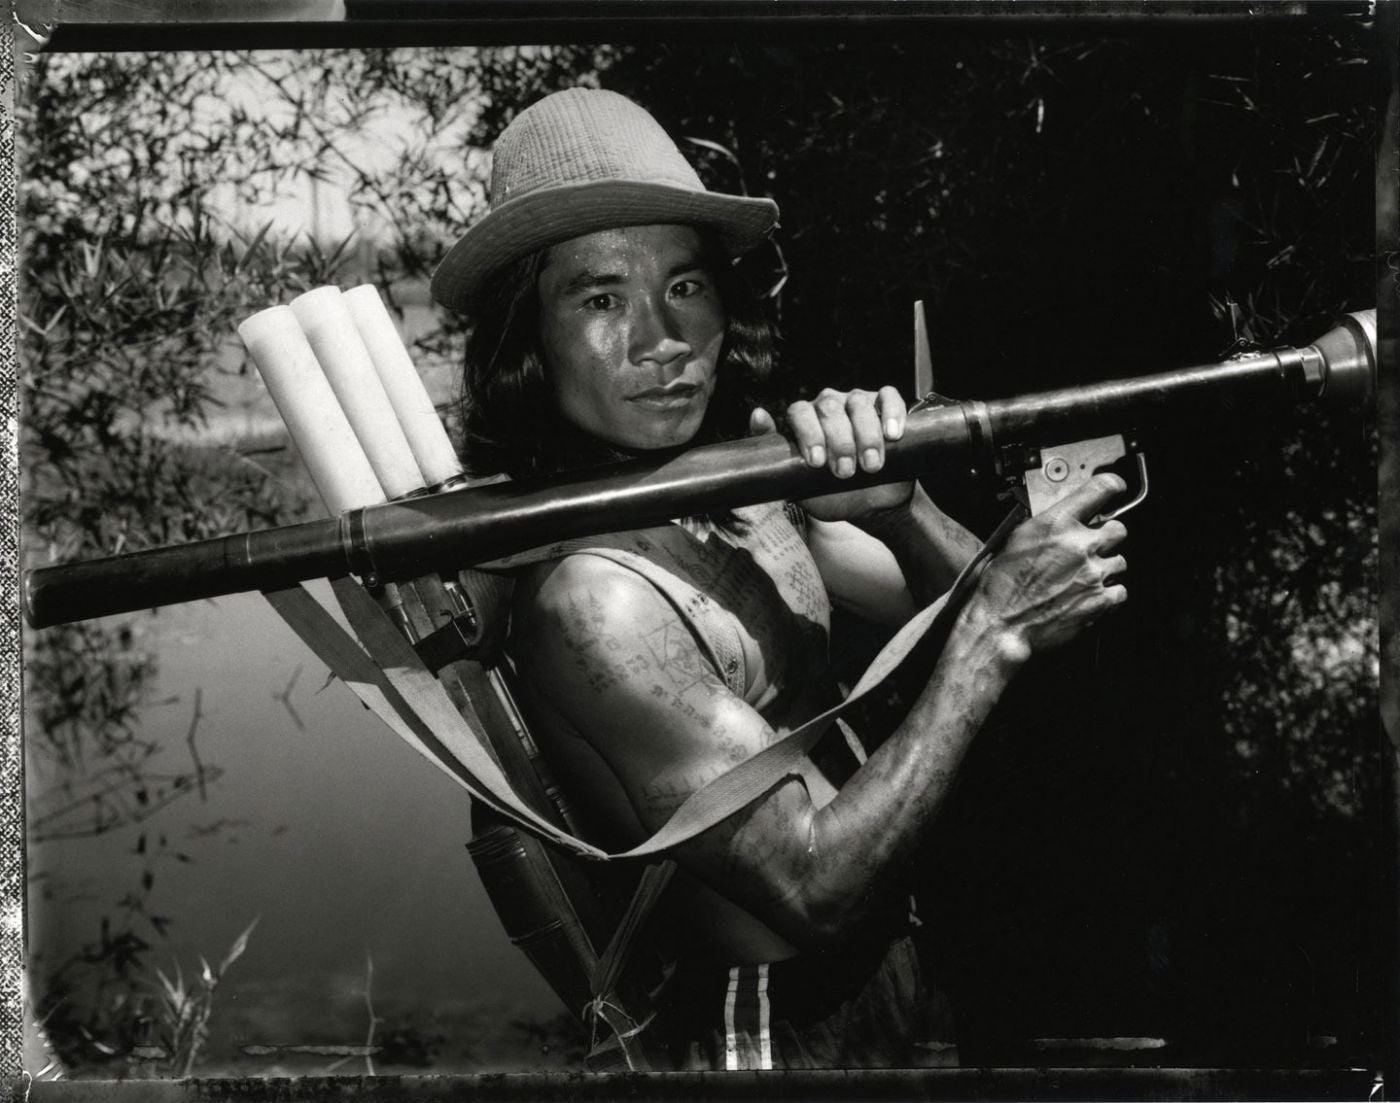 Bill Burke: "KPNLF Fighter with RPG, Lake Ampil, Thai Cambodia Border, 1984," Limited Edition Gelatin Silver Print (Open Edition; Print Size 20x24")